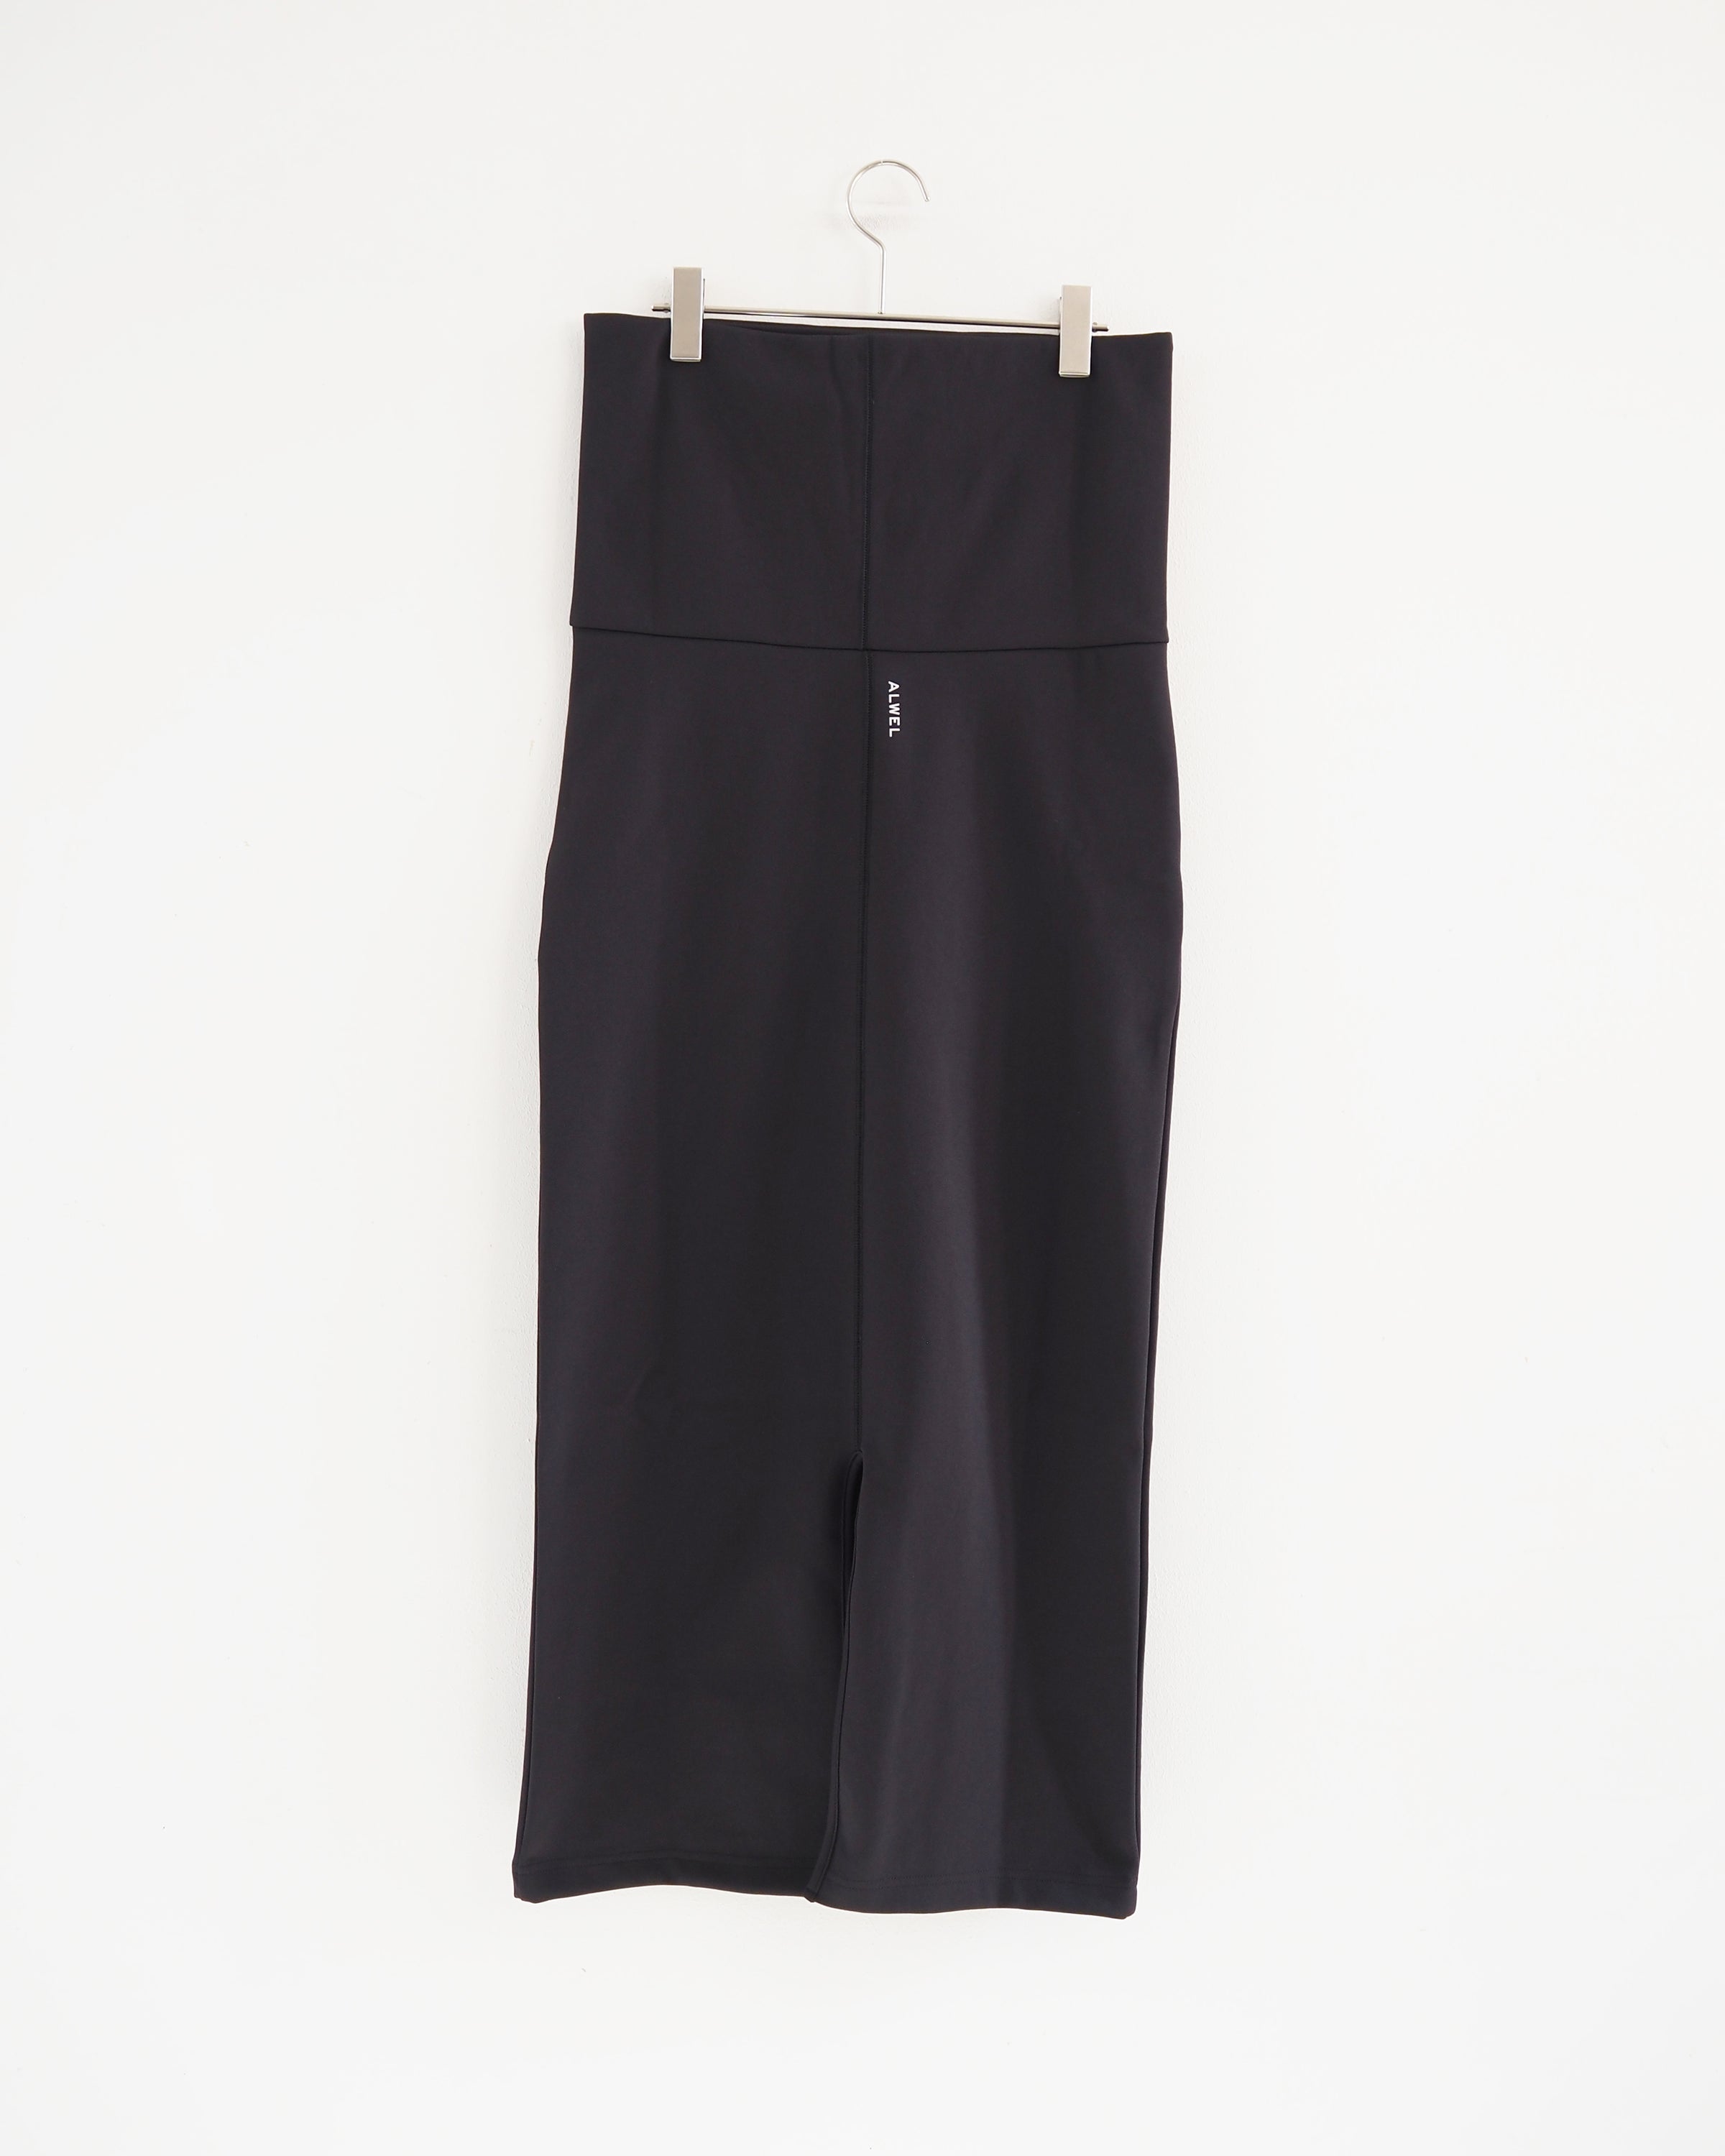 Pencil Two Way Skirt, Charcoal